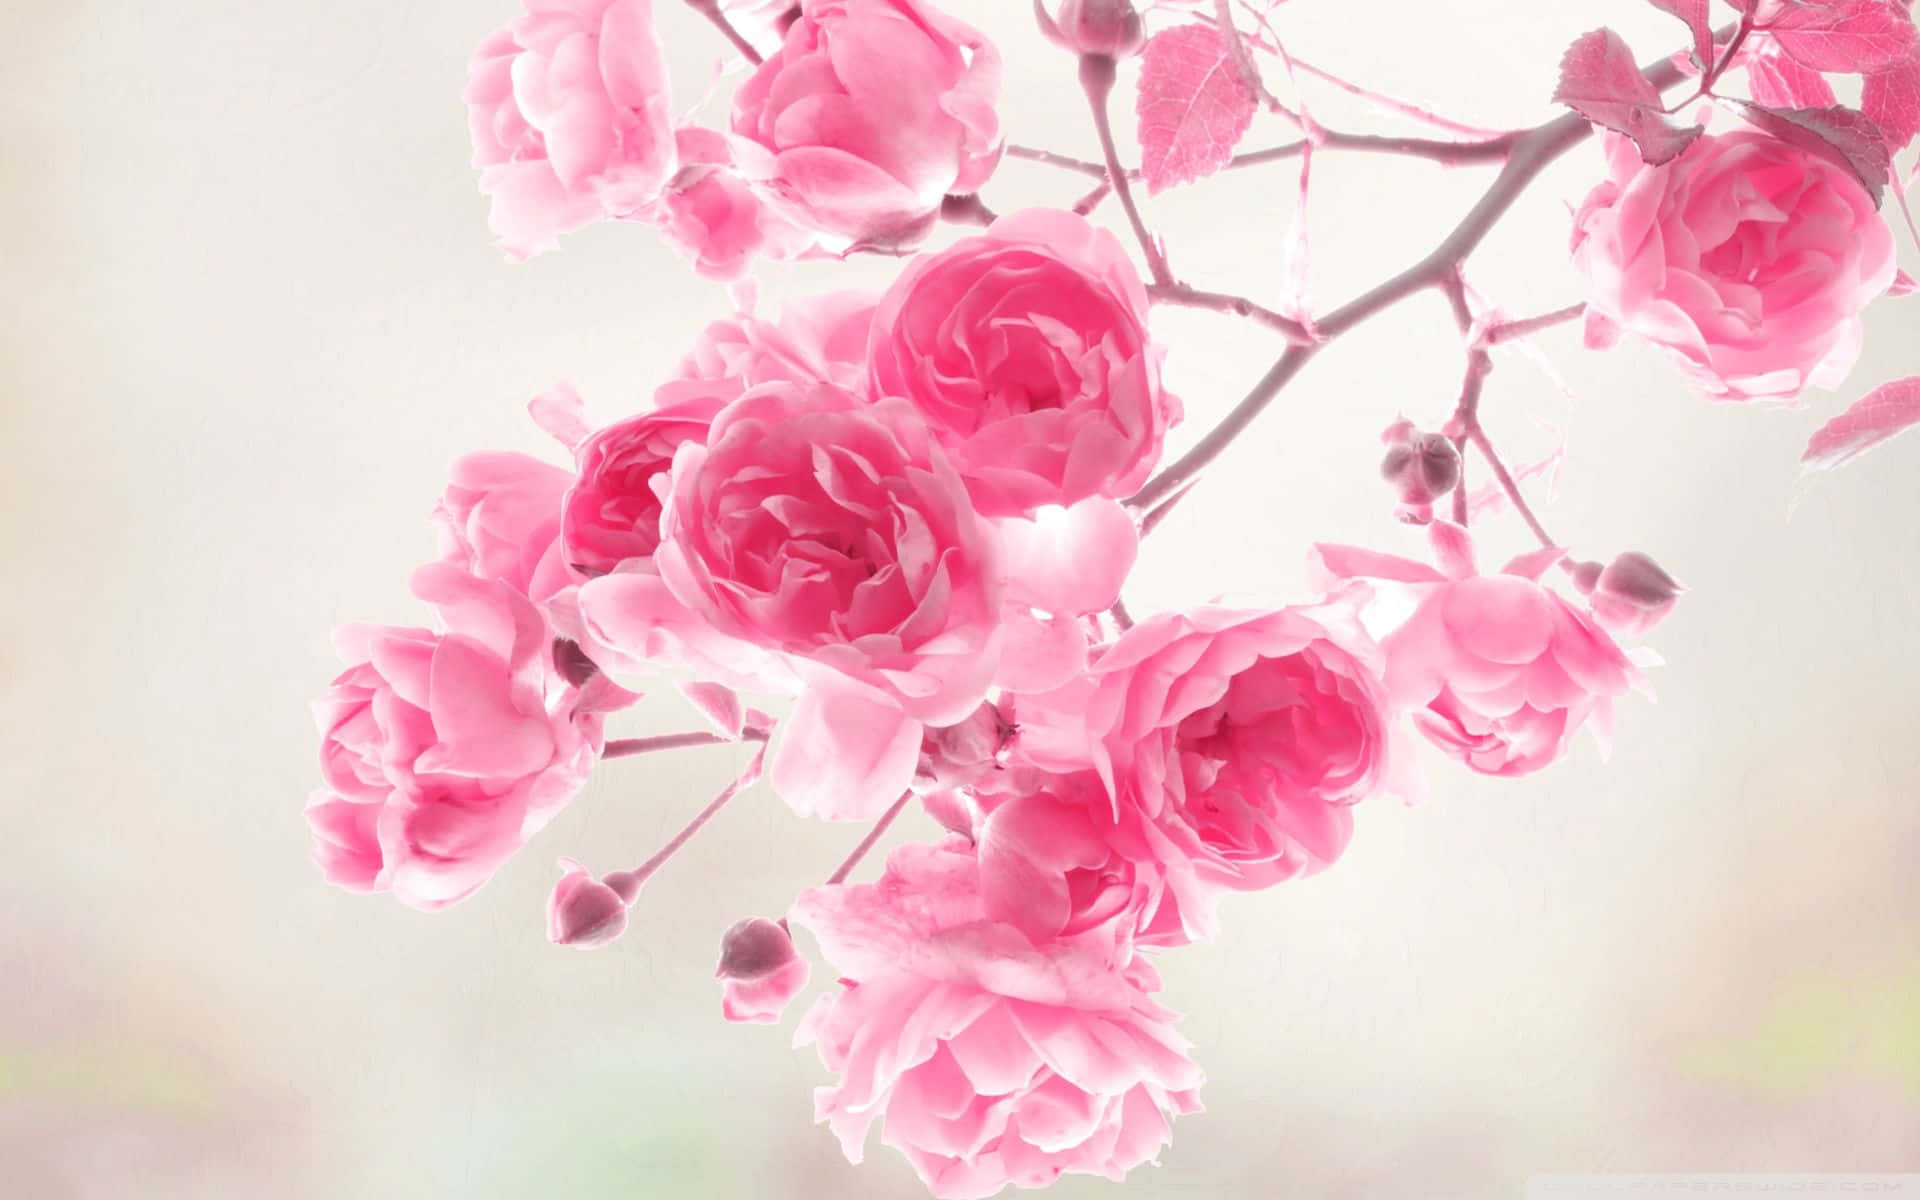 Blooming Tree Of Pink Roses Background